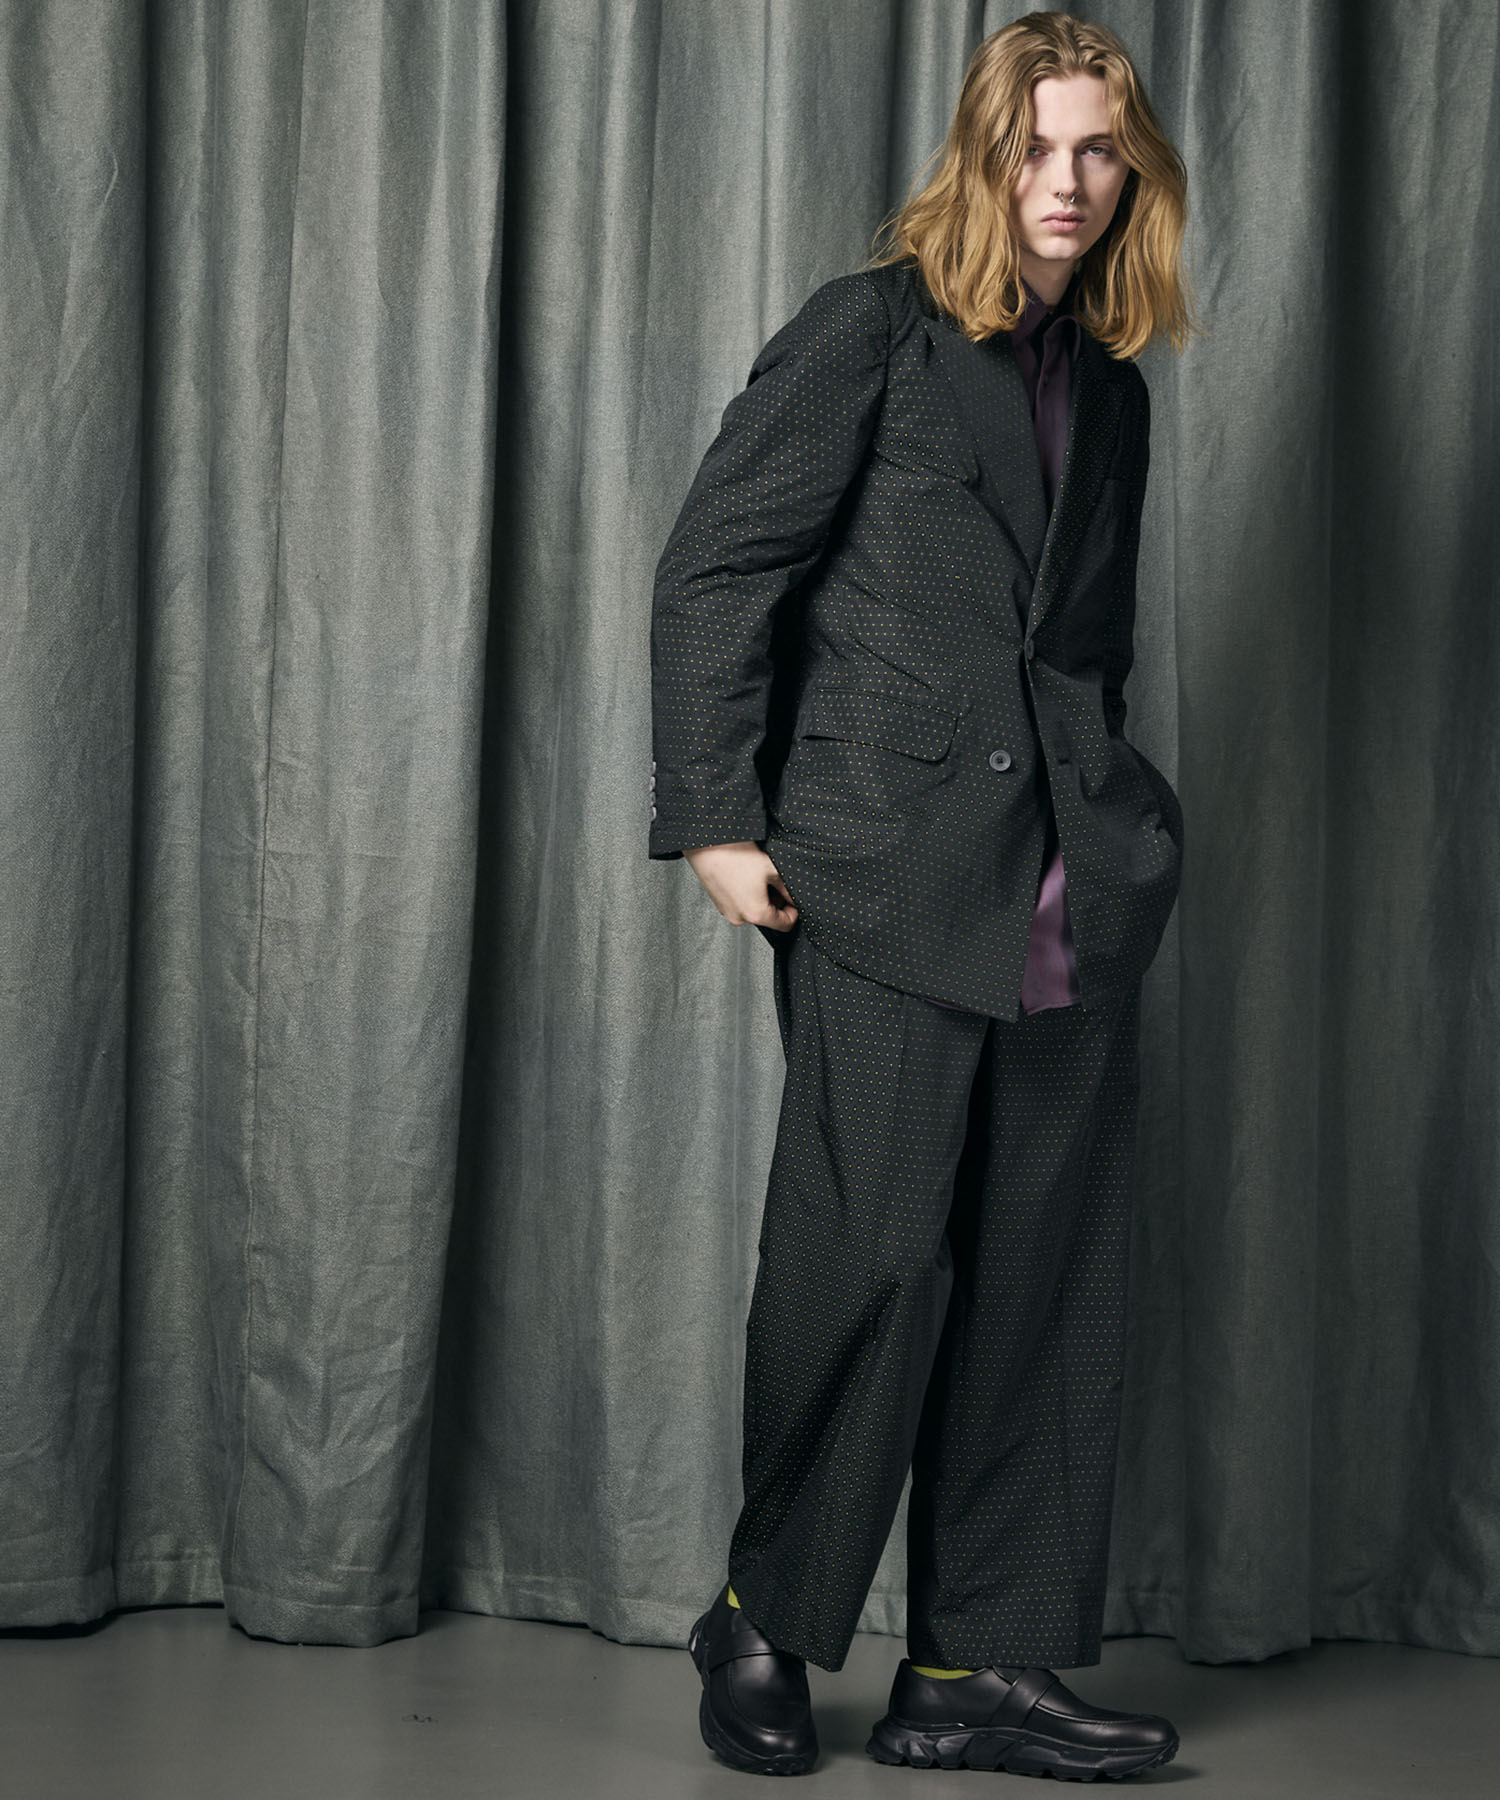 【LIMITED EDITION】Dress-Over Peaked Lapel Semi-Double Tailored Jacket